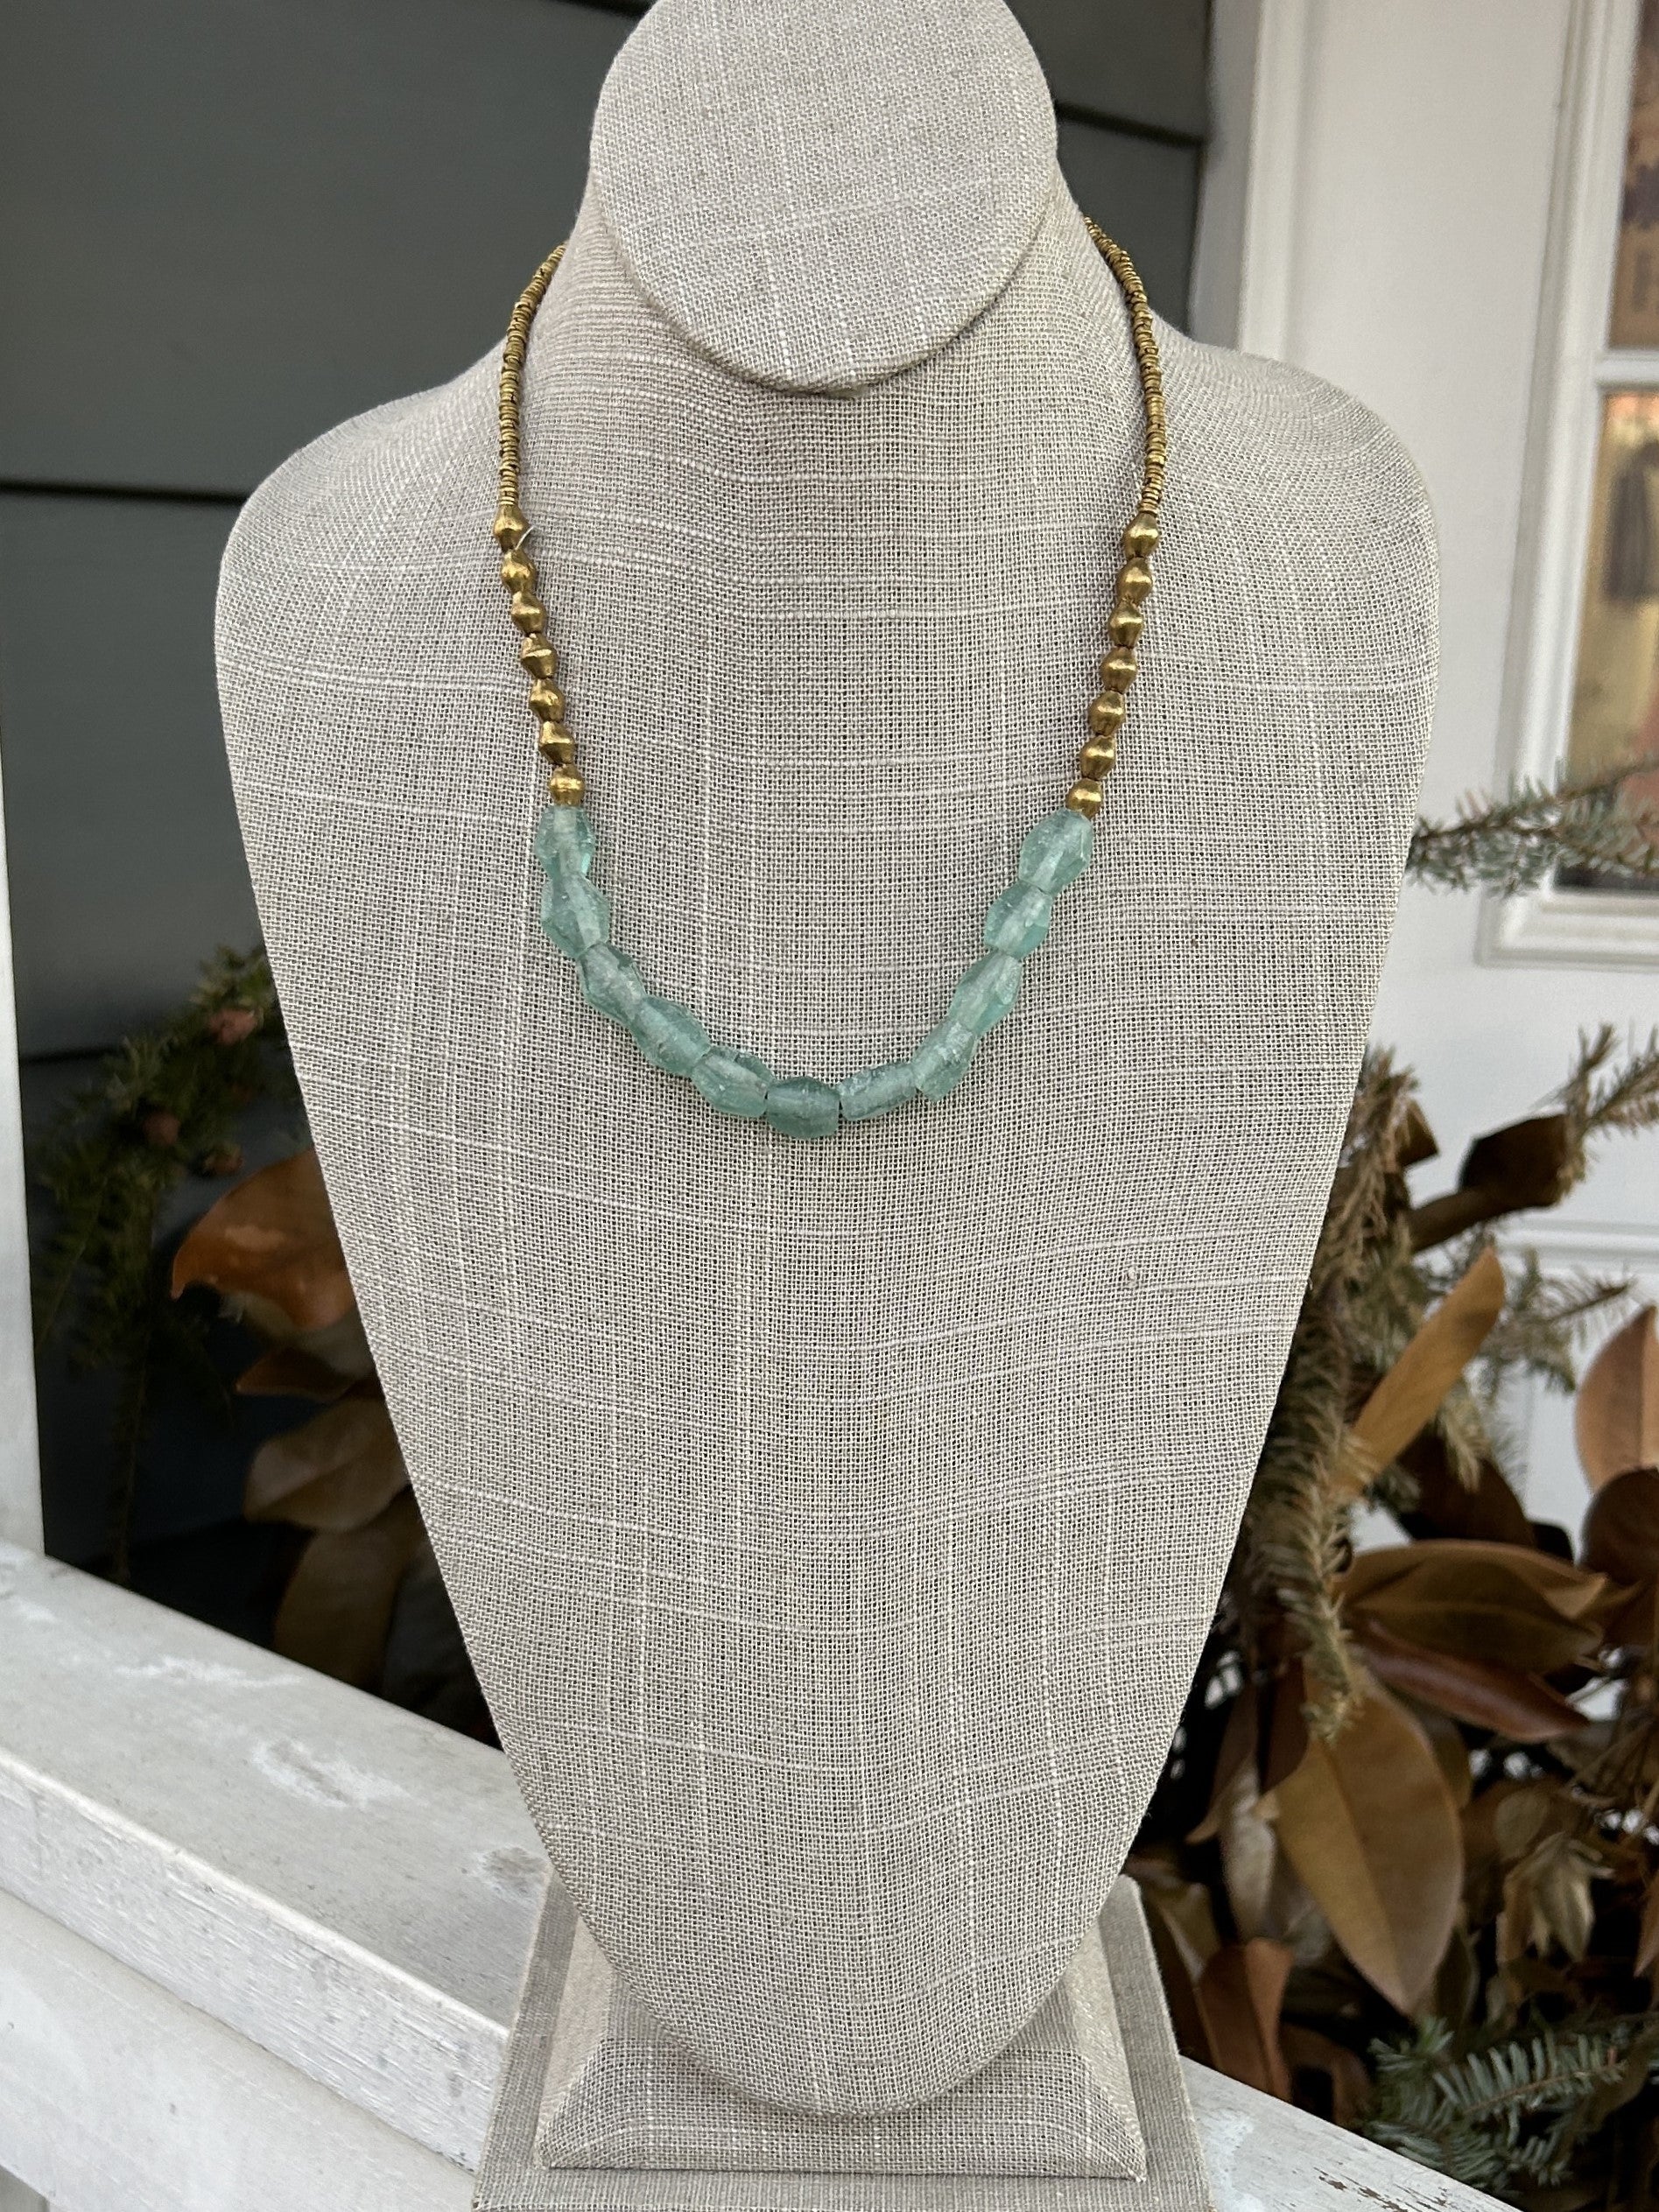 Transform any outfit with this Sea Glass Beaded Brass Necklace! The adjustable design allows for a perfect fit, while the brass beads and sea glass accent add a unique Boho look. Chic and versatile, this necklace is a must-have!